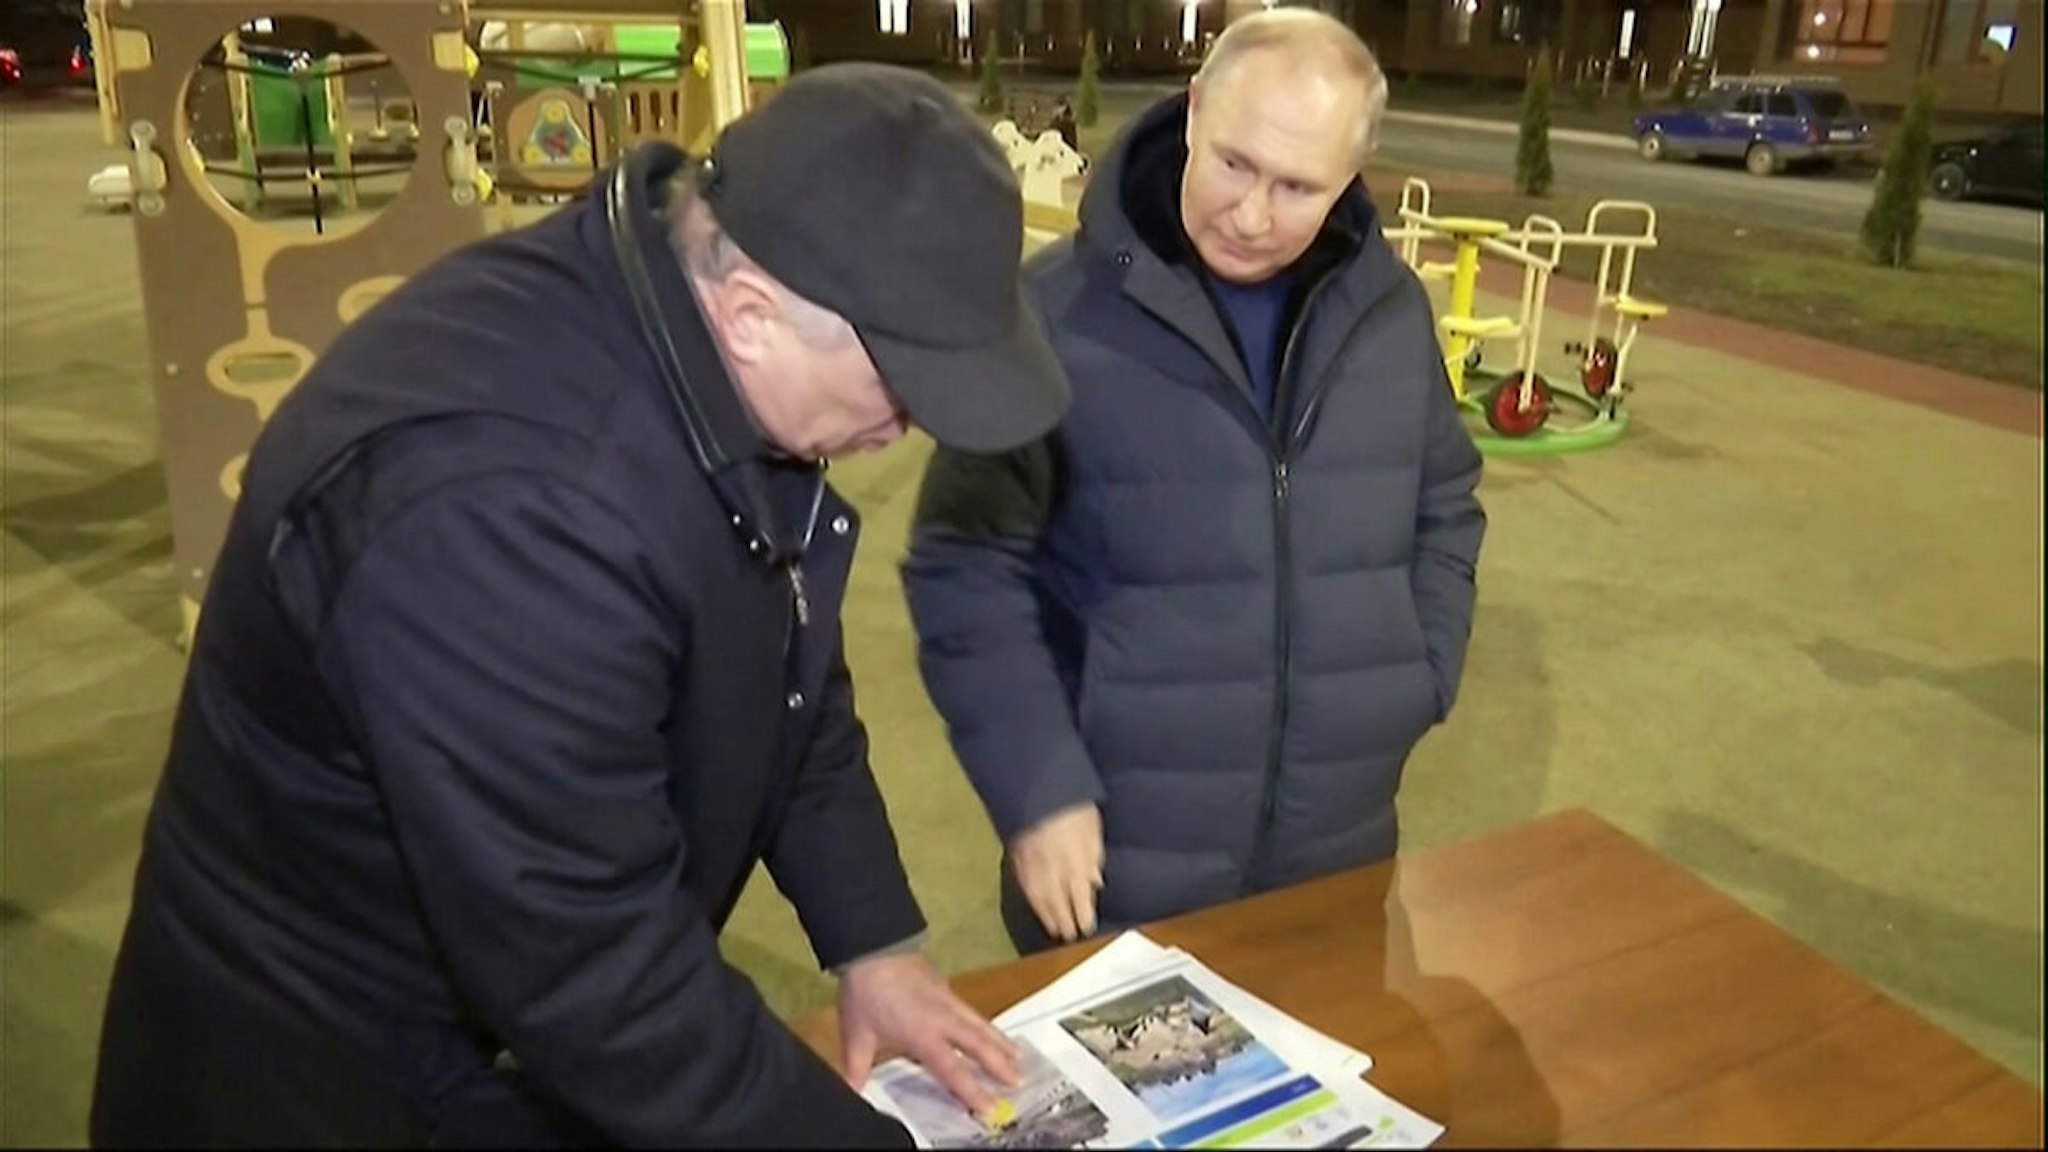 In this grab taken from video released by Russian broadcaster VGTRK as POOL on March 19, 2023, shows Russia's President Vladimir Putin (R) gesturing while speaking with Deputy Prime Minister Marat Khusnullin as they look at reconstruction illustrations while he visits the Ukranian city of Mariupol late March 18, 2023.